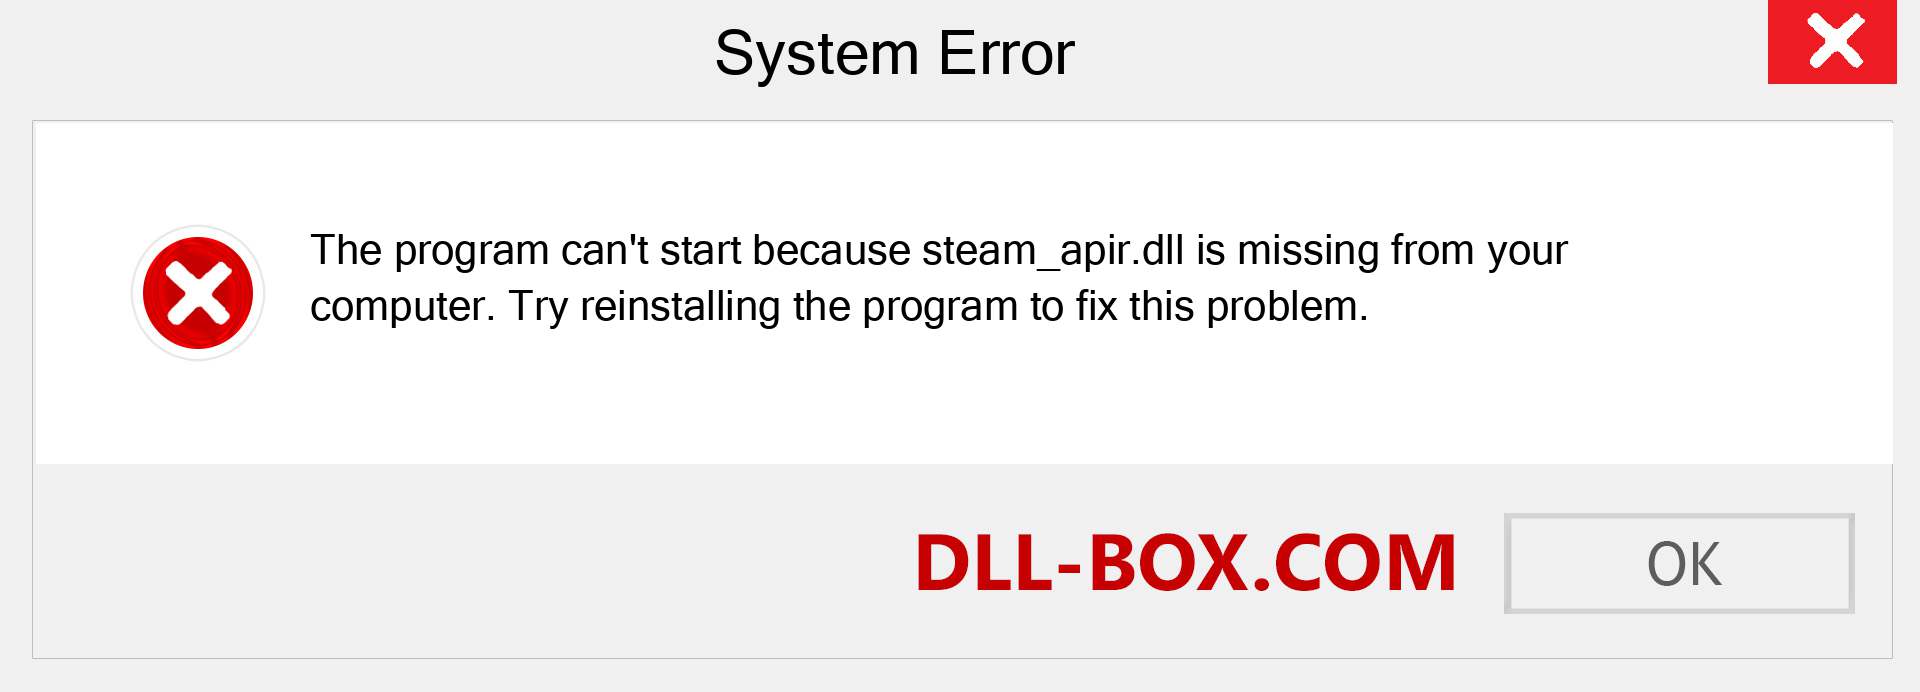  steam_apir.dll file is missing?. Download for Windows 7, 8, 10 - Fix  steam_apir dll Missing Error on Windows, photos, images